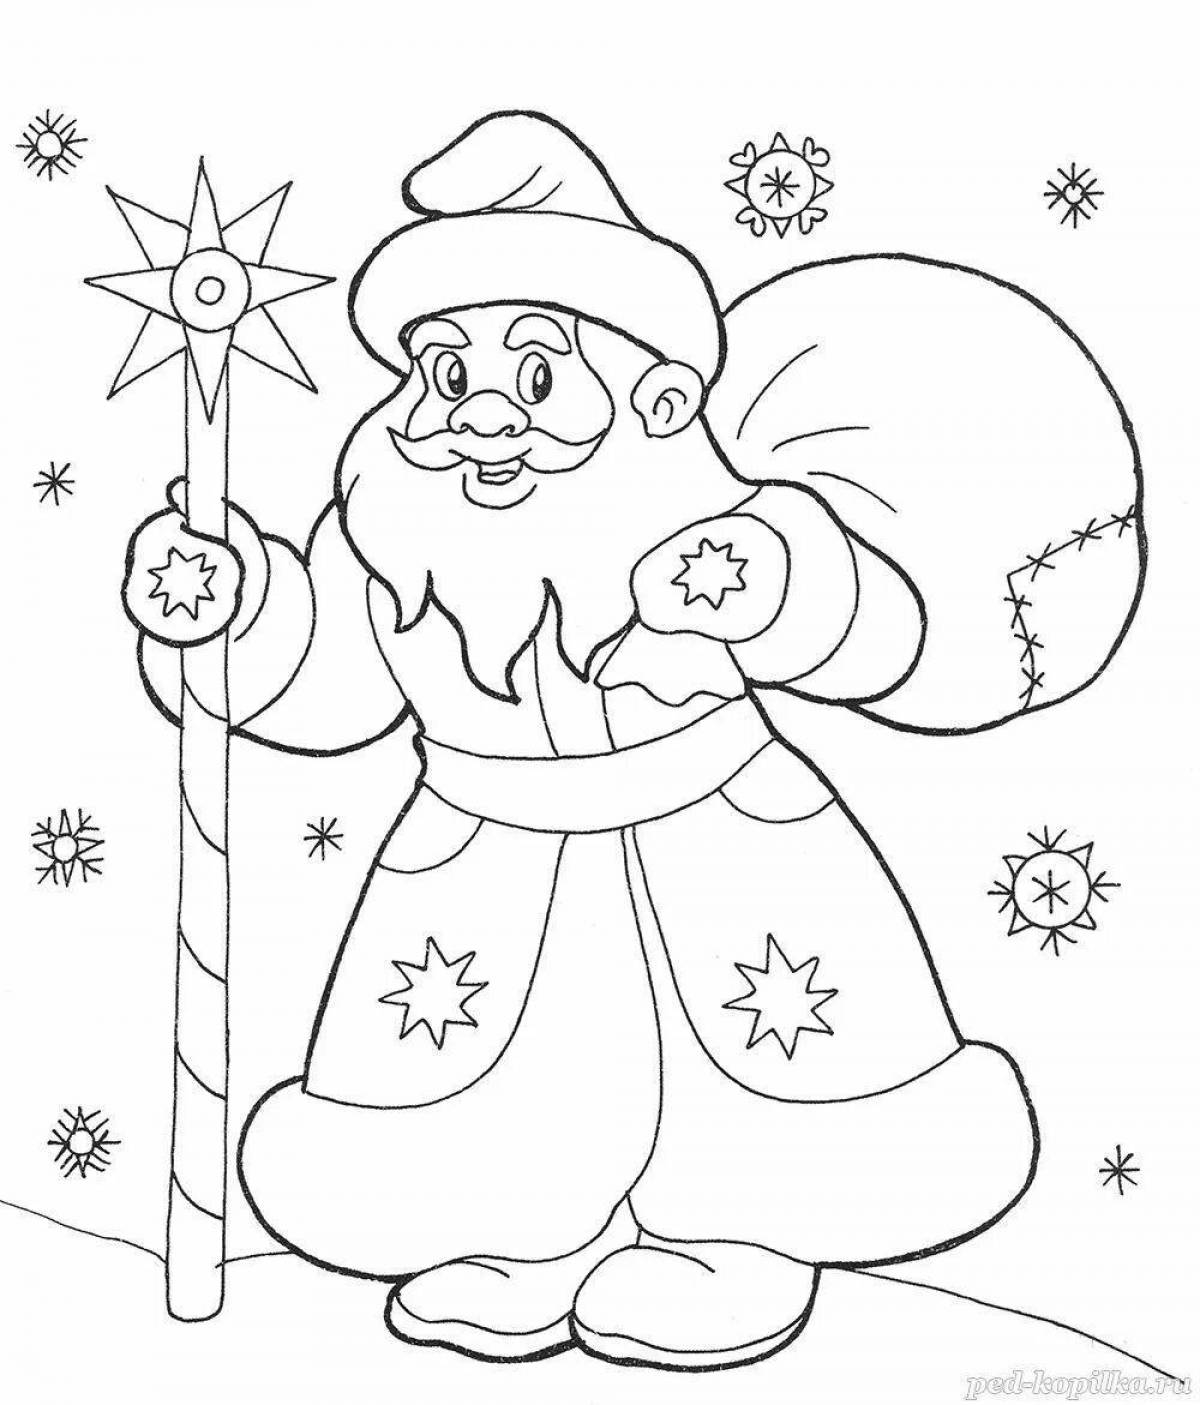 Frantic Christmas coloring book for 8-9 year olds